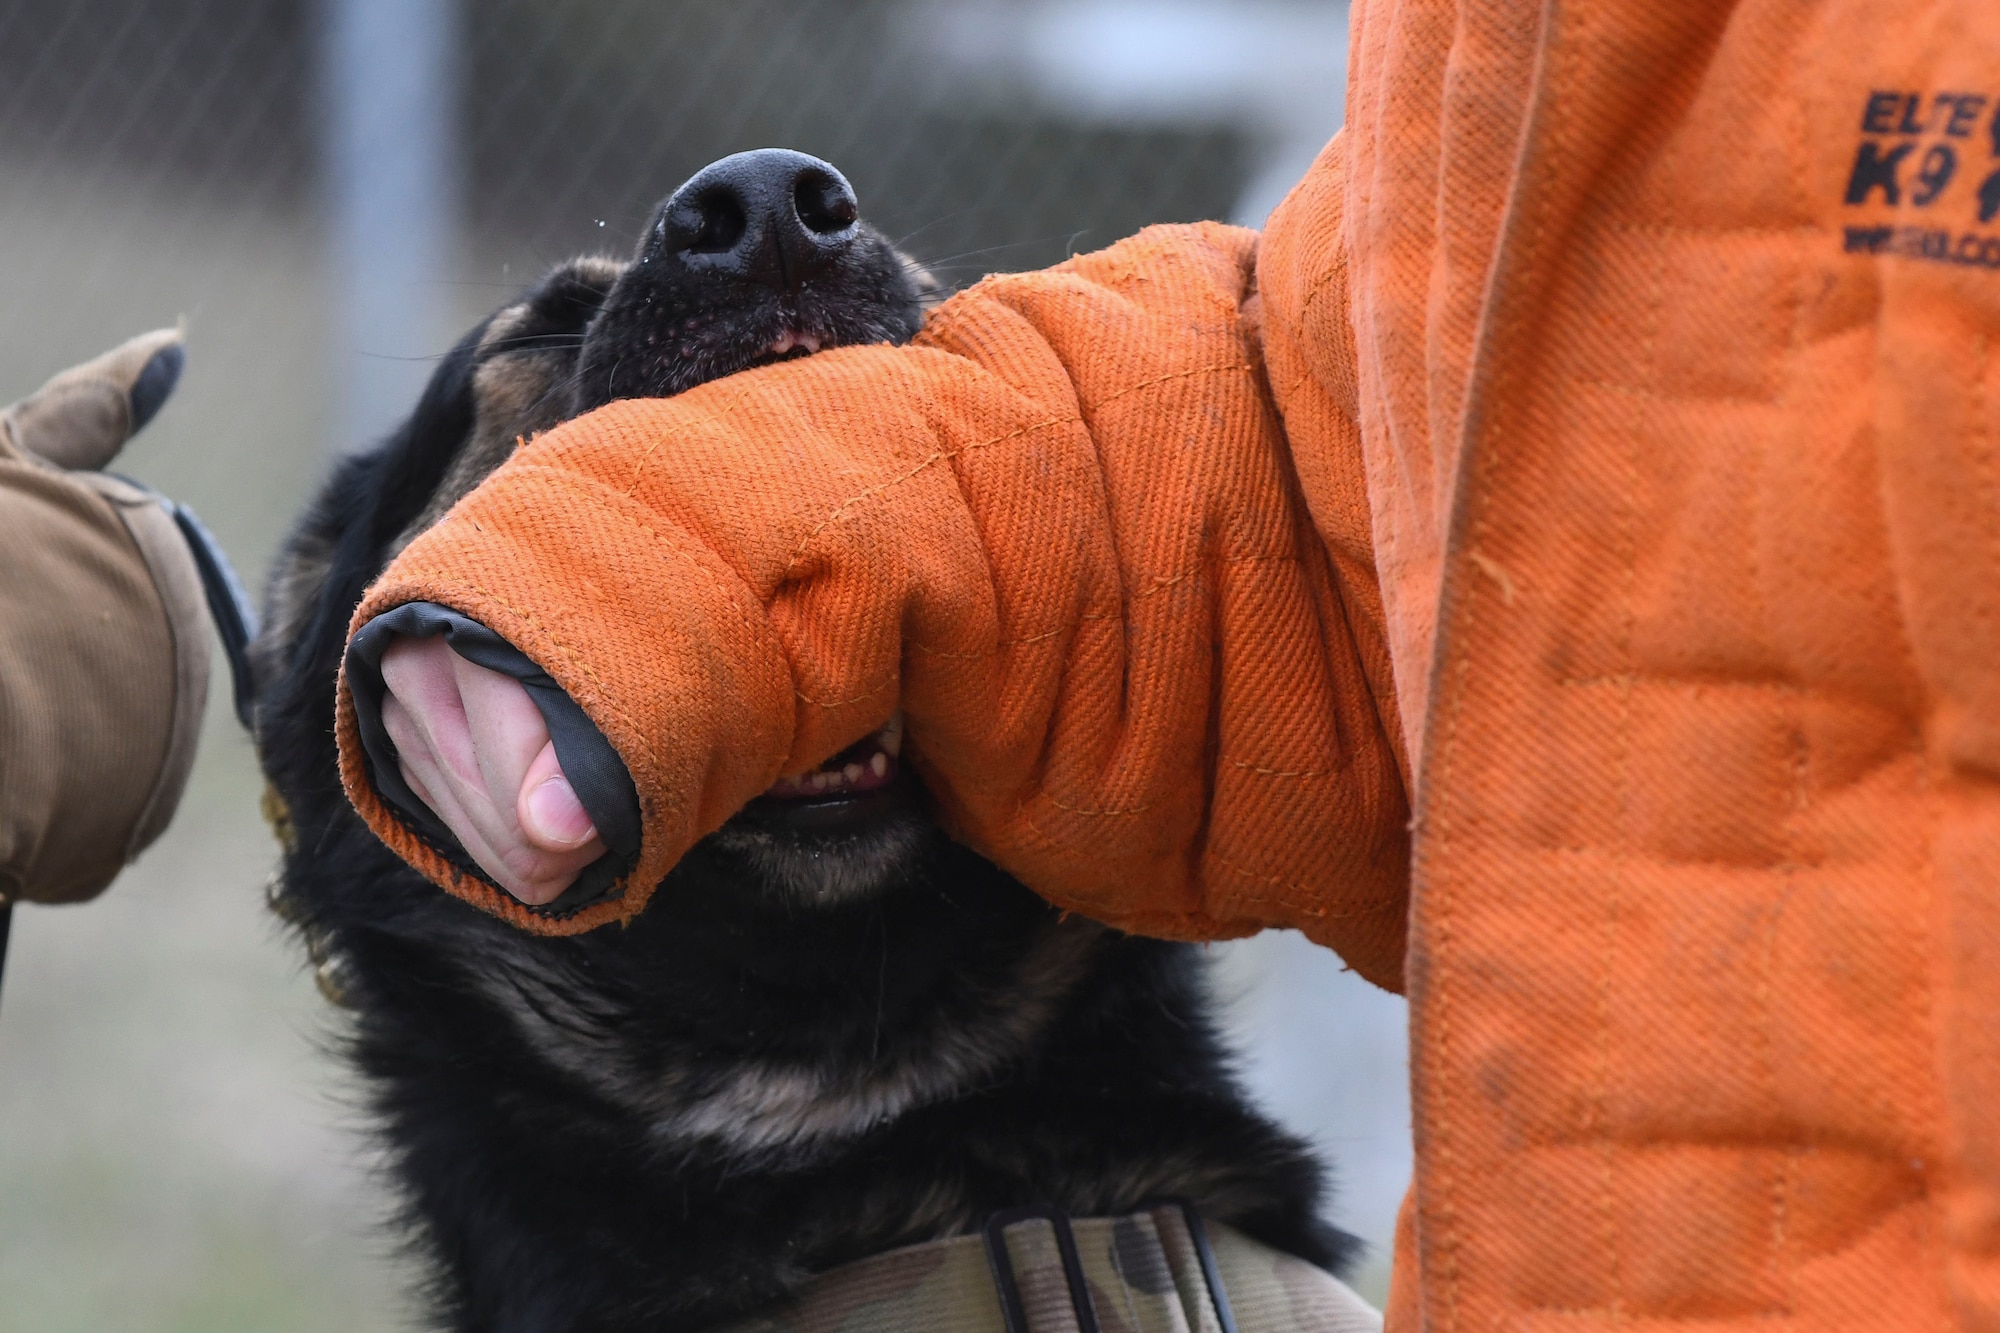 A German Shepard military working dog bites the arm of a bite suit during a bite demonstration.